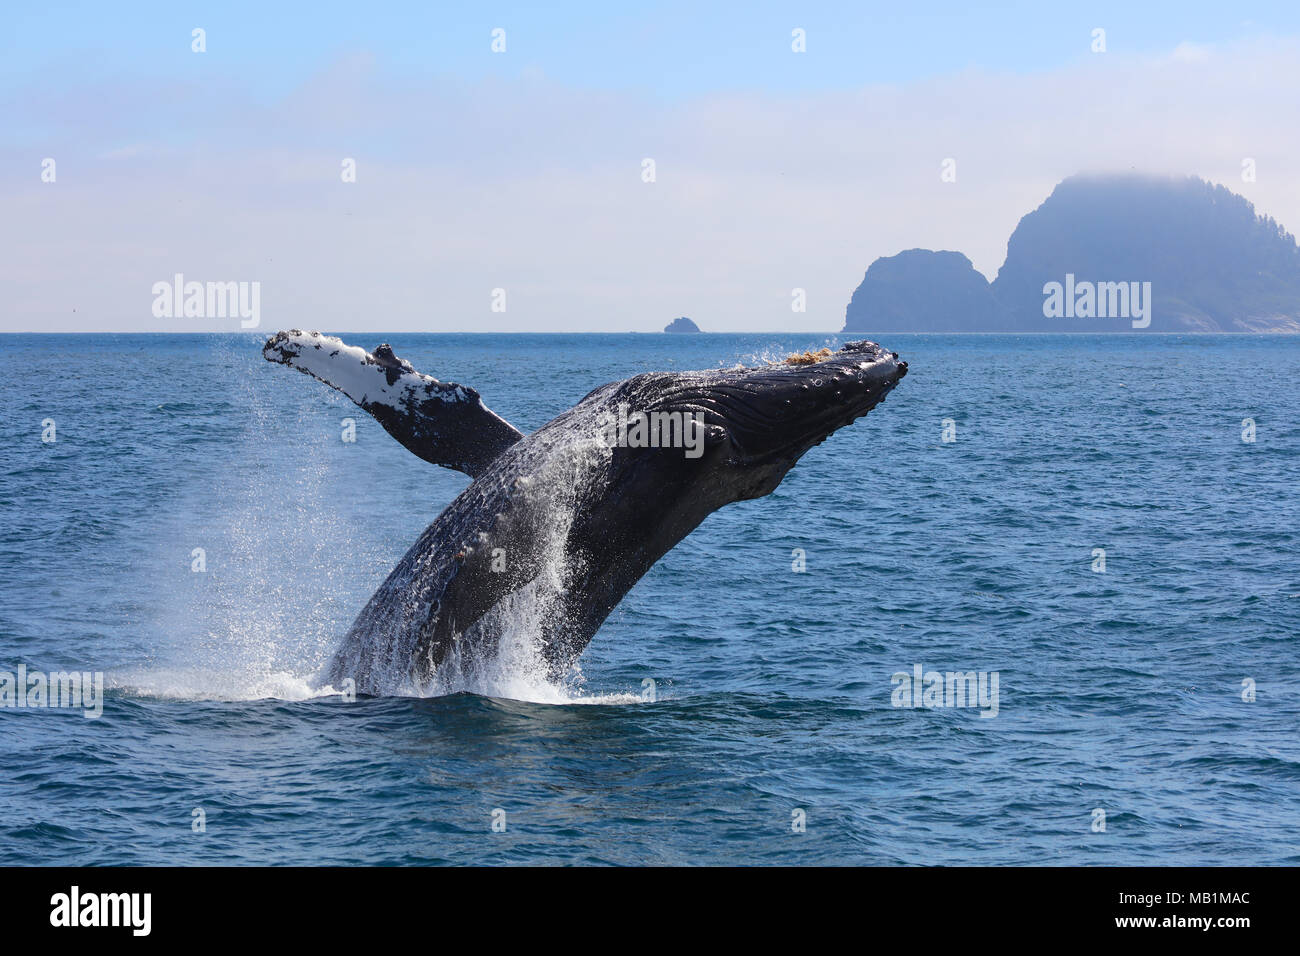 Humpback whale breaching out of the Pacific Ocean with mountain in the background in Kenai Fjords National Park, Alaska Stock Photo